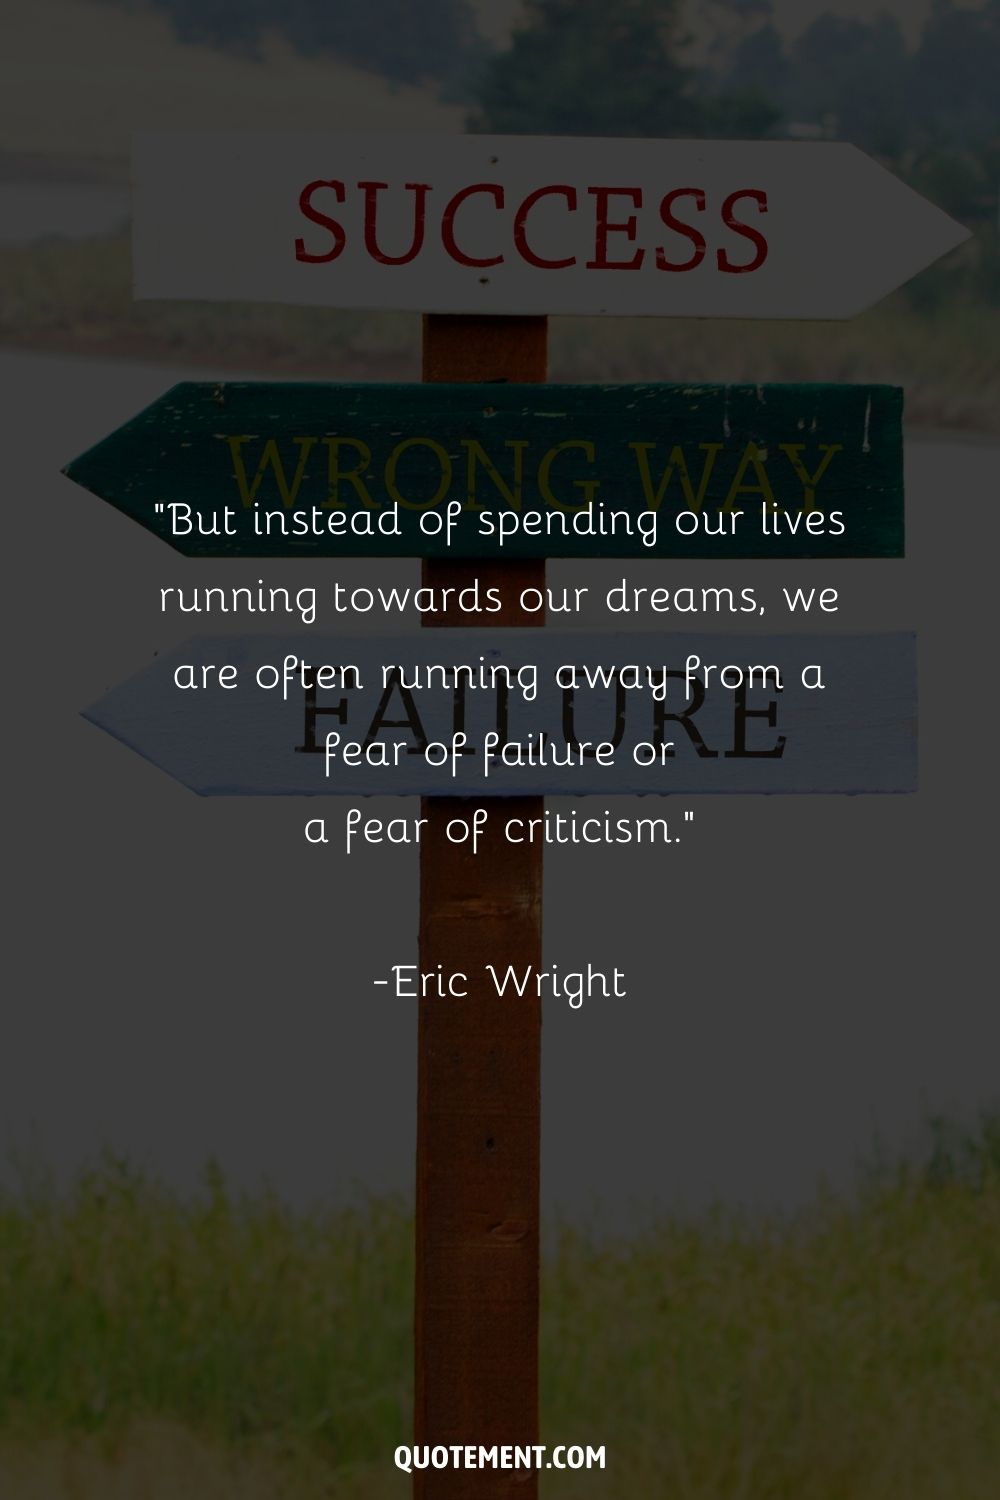 ​​“But instead of spending our lives running towards our dreams, we are often running away from a fear of failure or a fear of criticism.” ― Eric Wright